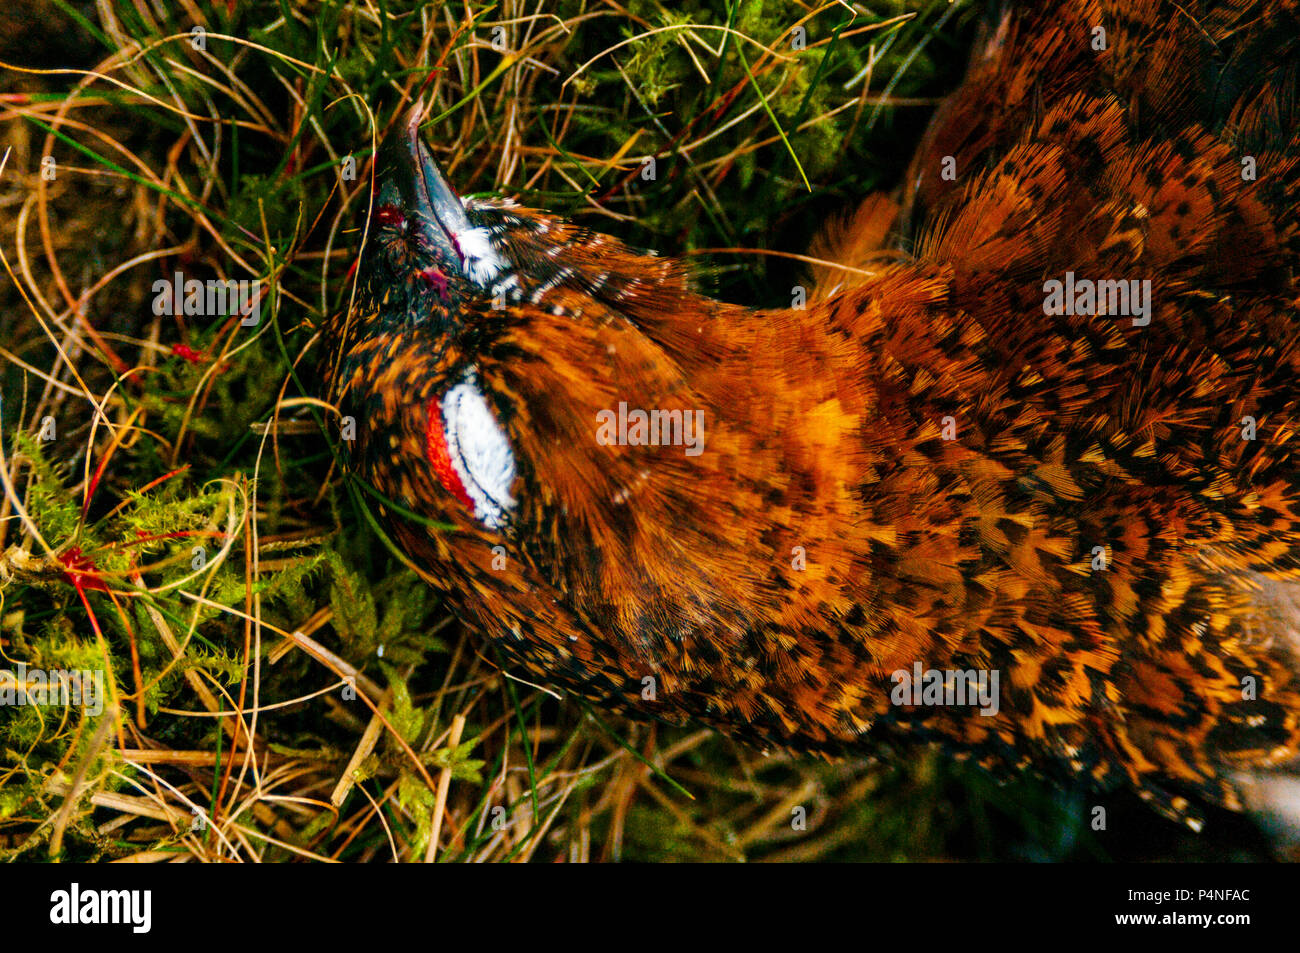 North Yorkshire, Engalnd, UK | A Red Grouse (Lagopus lagopus scotica) that has been shot during a driven grouse shoot on North Yorkshire moorland Stock Photo